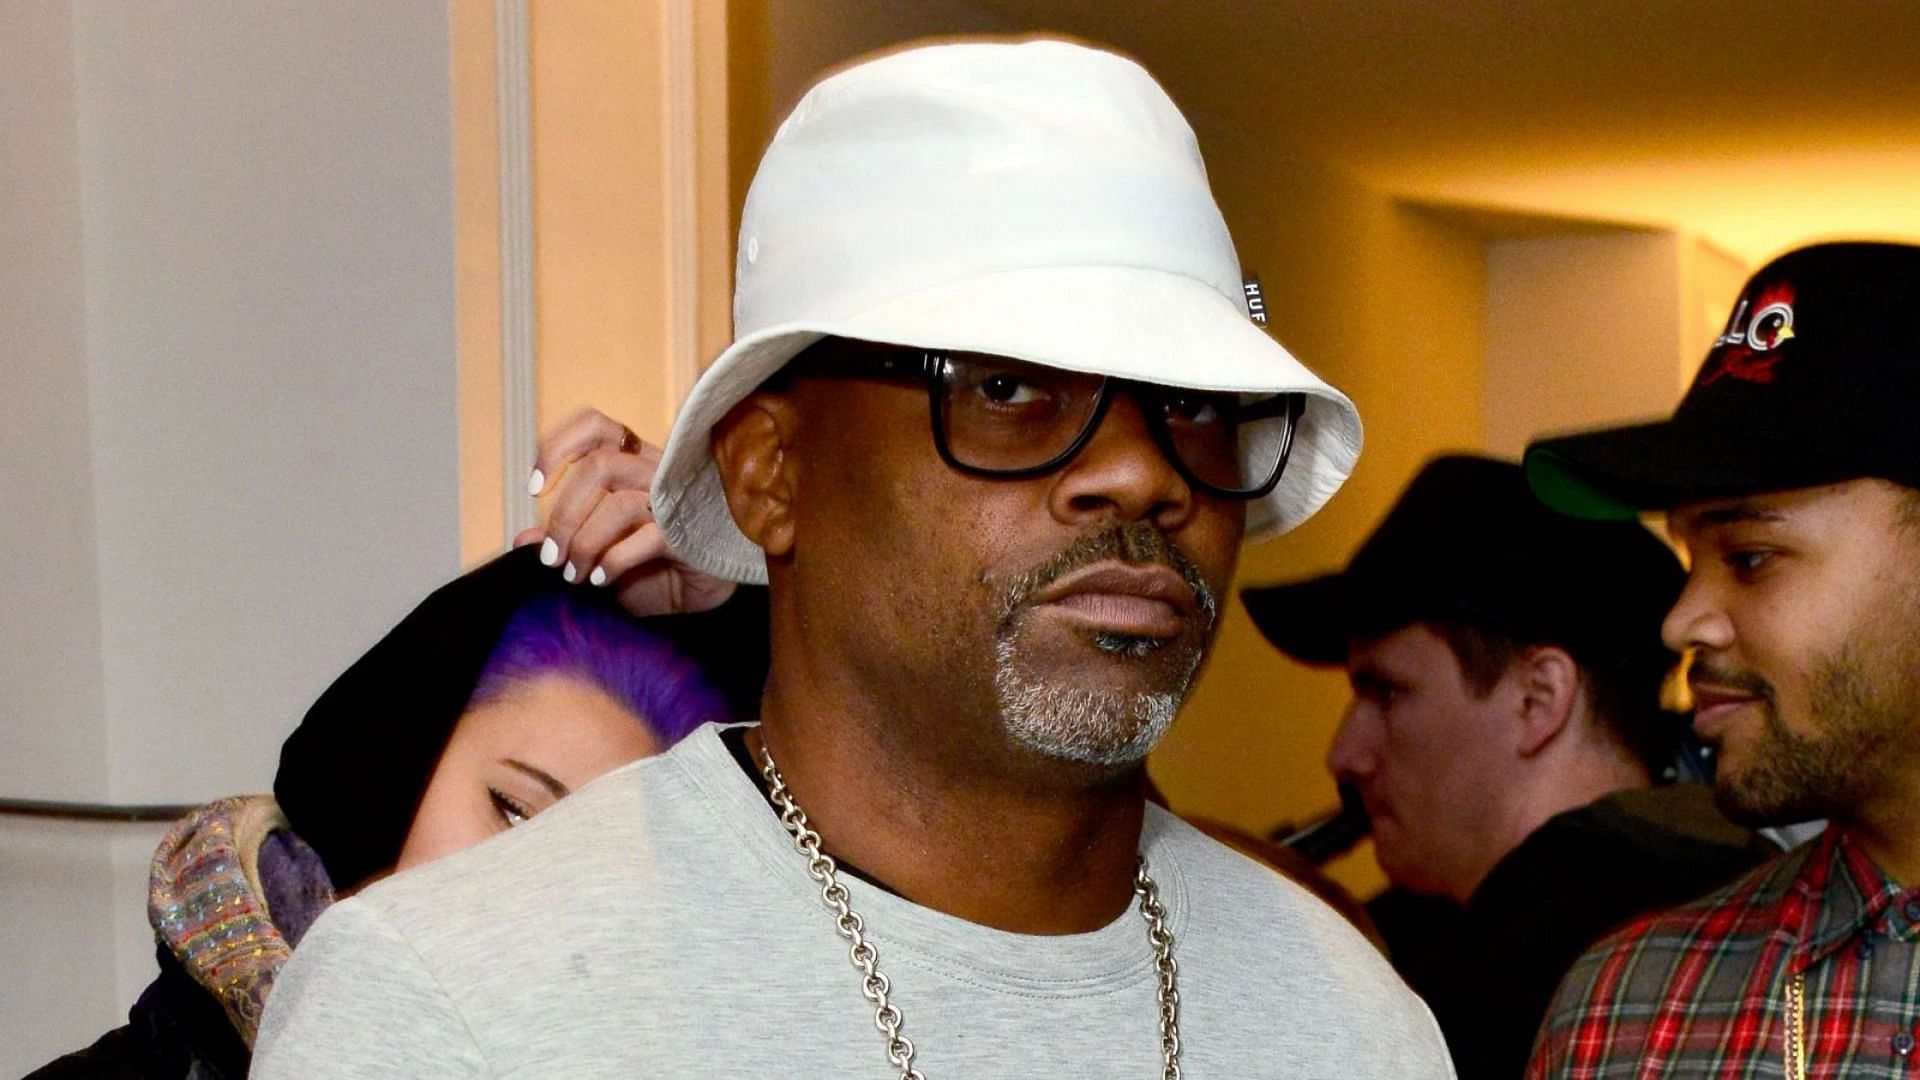 Dame Dash, to whom Bunn sued for allegedly damaging her photographs (Image via Getty)